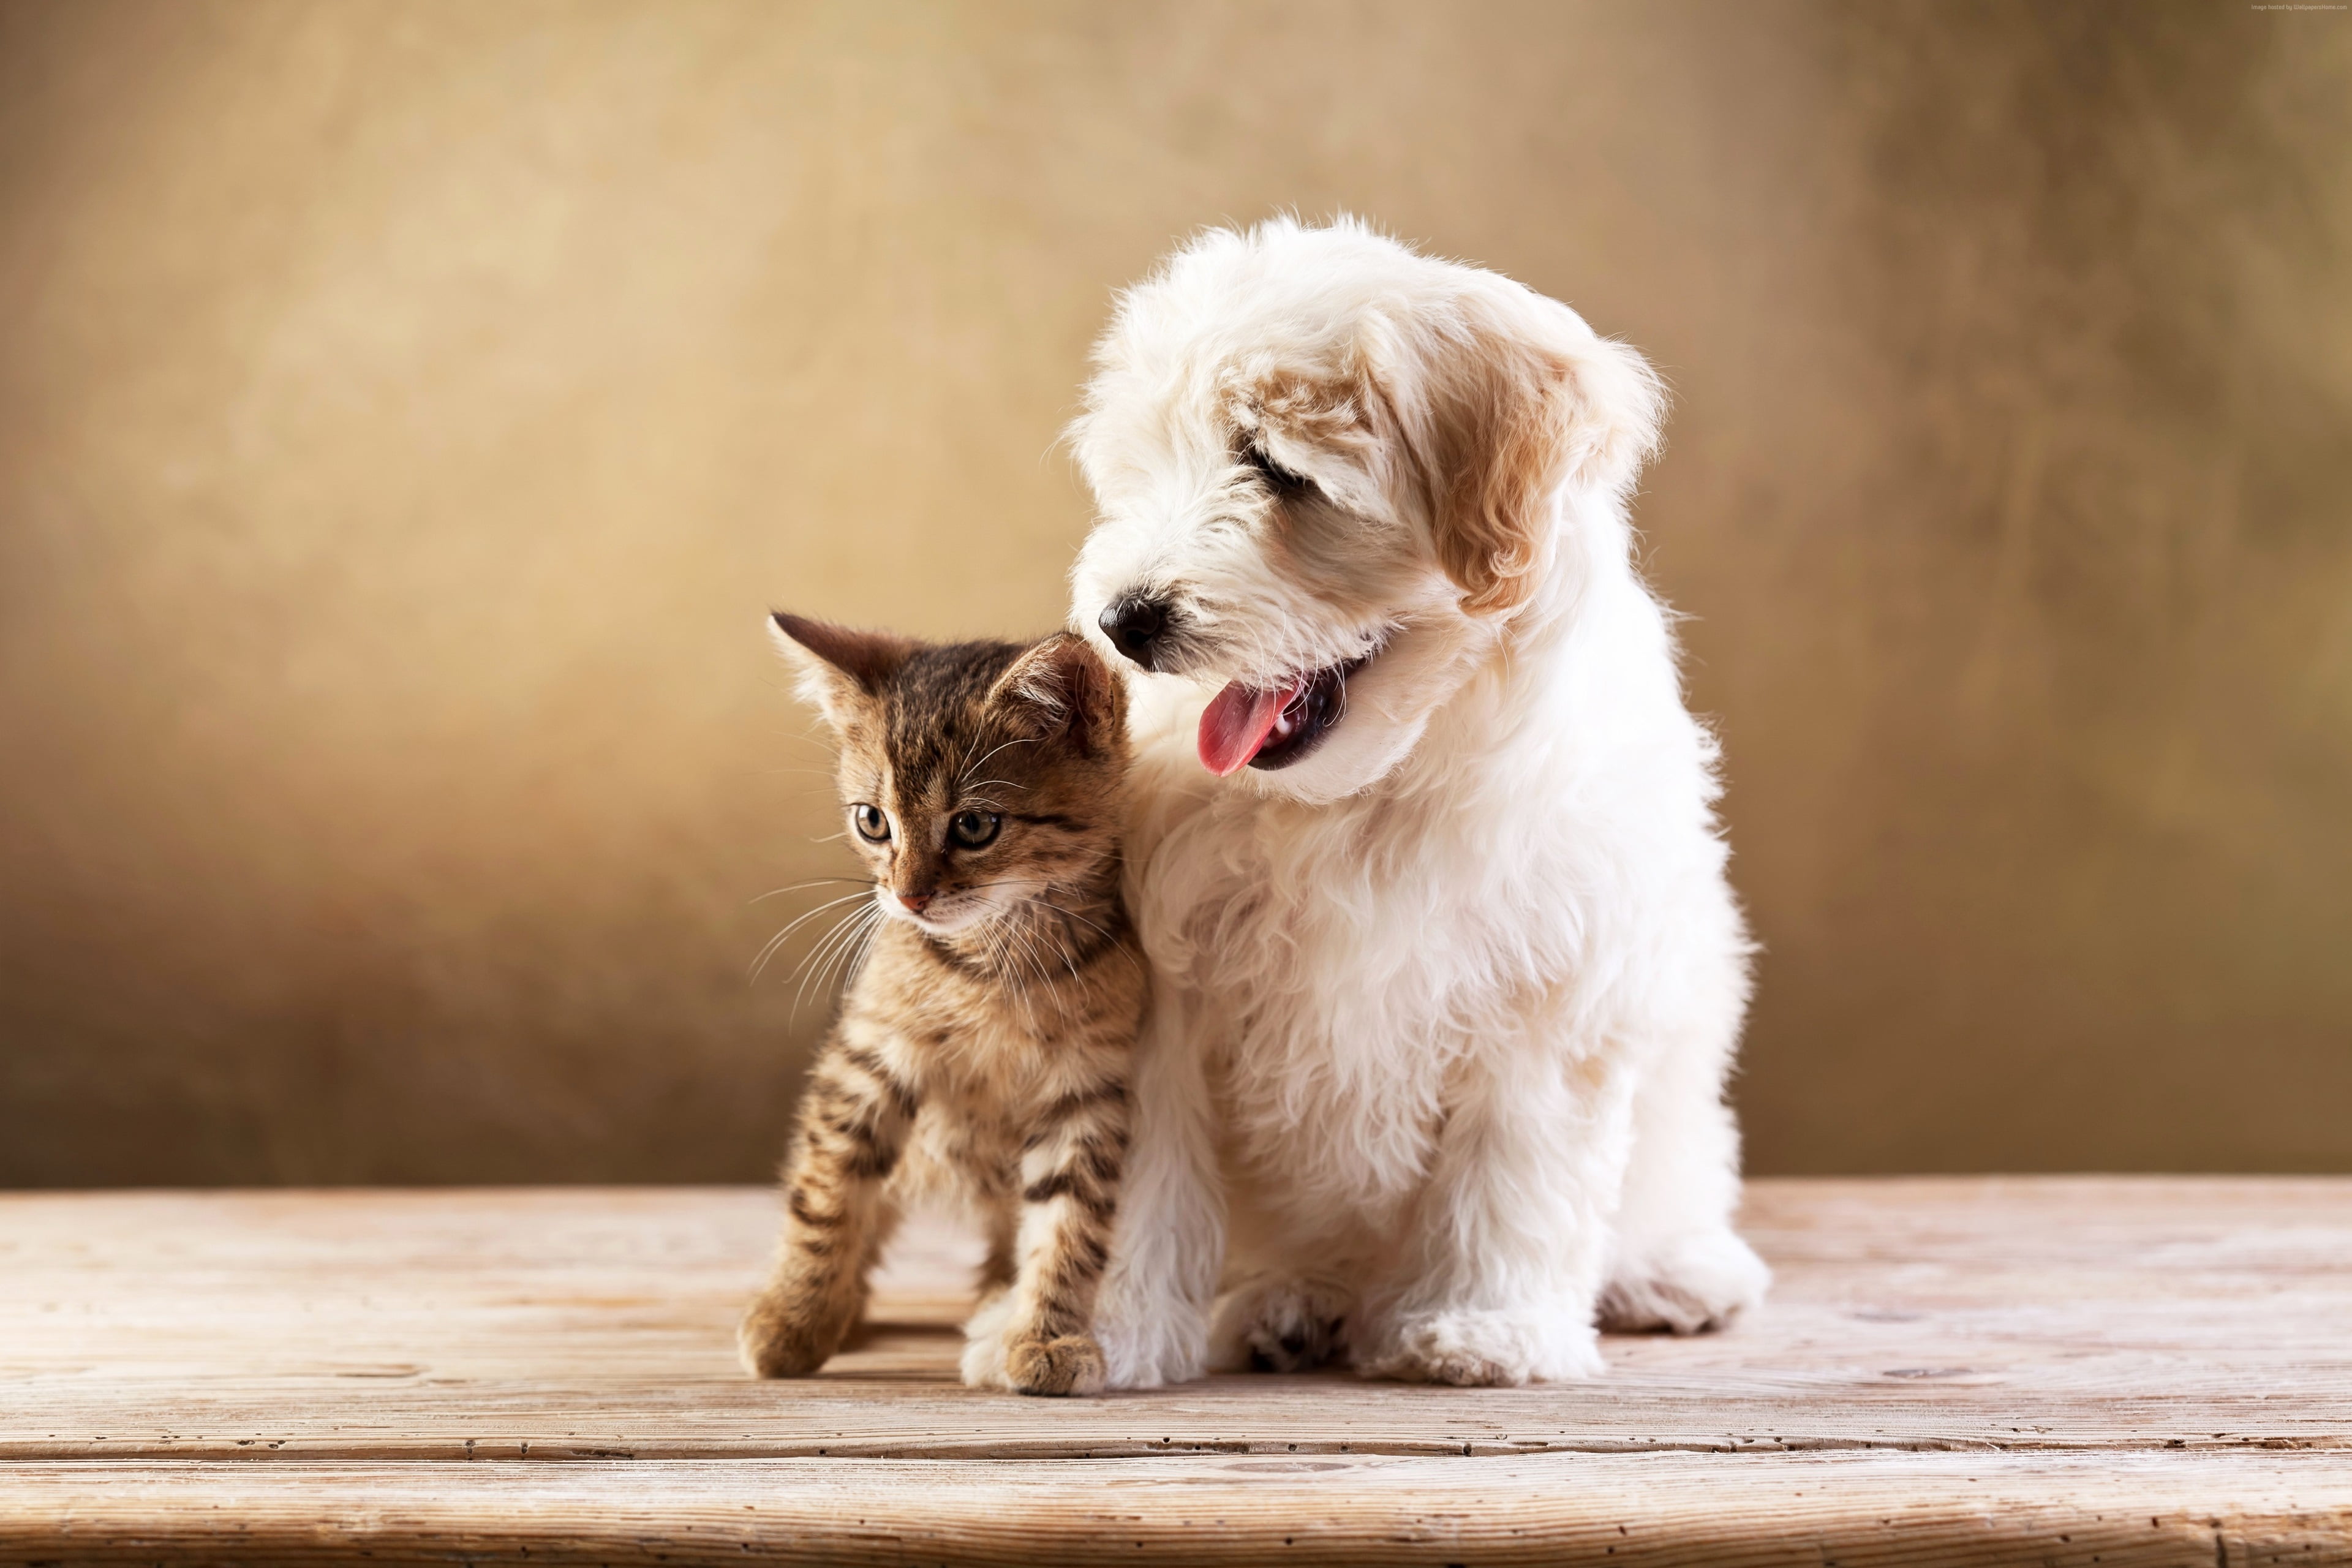 cat amp dog 4k wallpaper picture, domestic, pets, animal themes